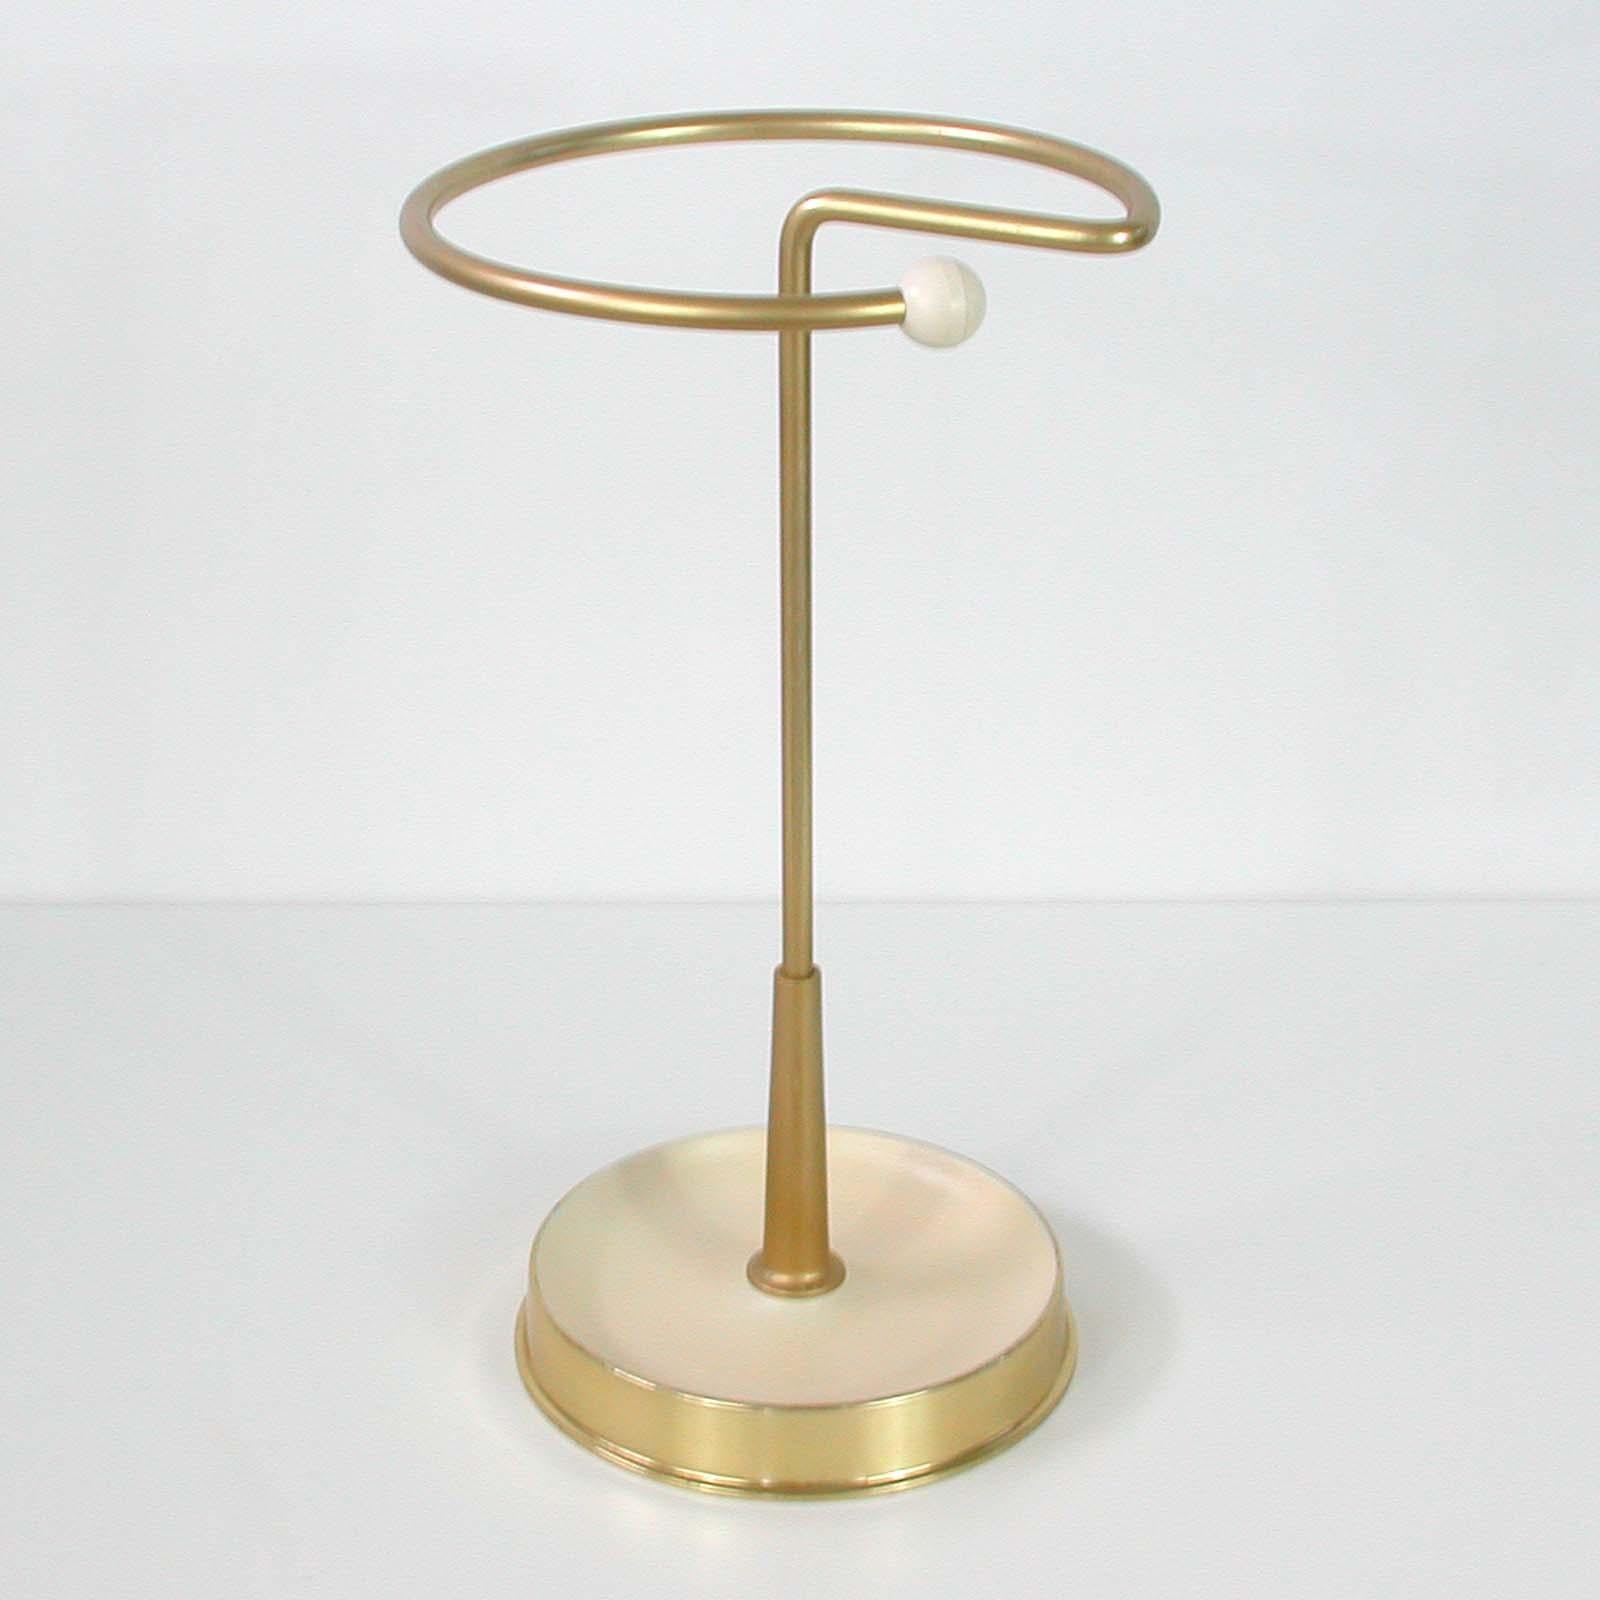 This Bauhaus inspired atomic umbrella stand was made in Germany in the 1950s.
It is made of gold anodized metal and has got a cream lacquered brass base.
  